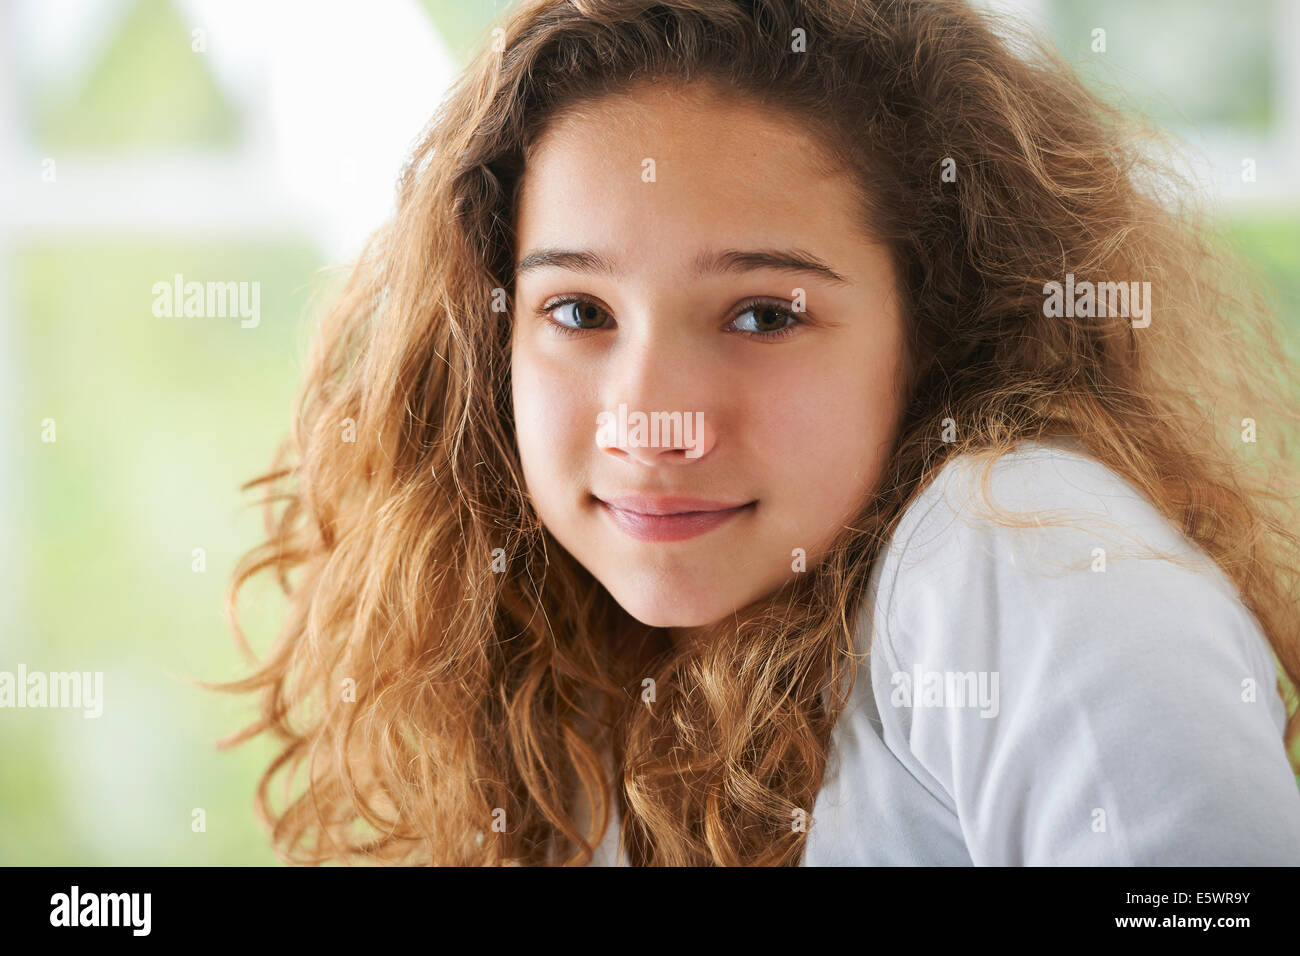 Young girl with brown hair ,smiling, portrait Stock Photo